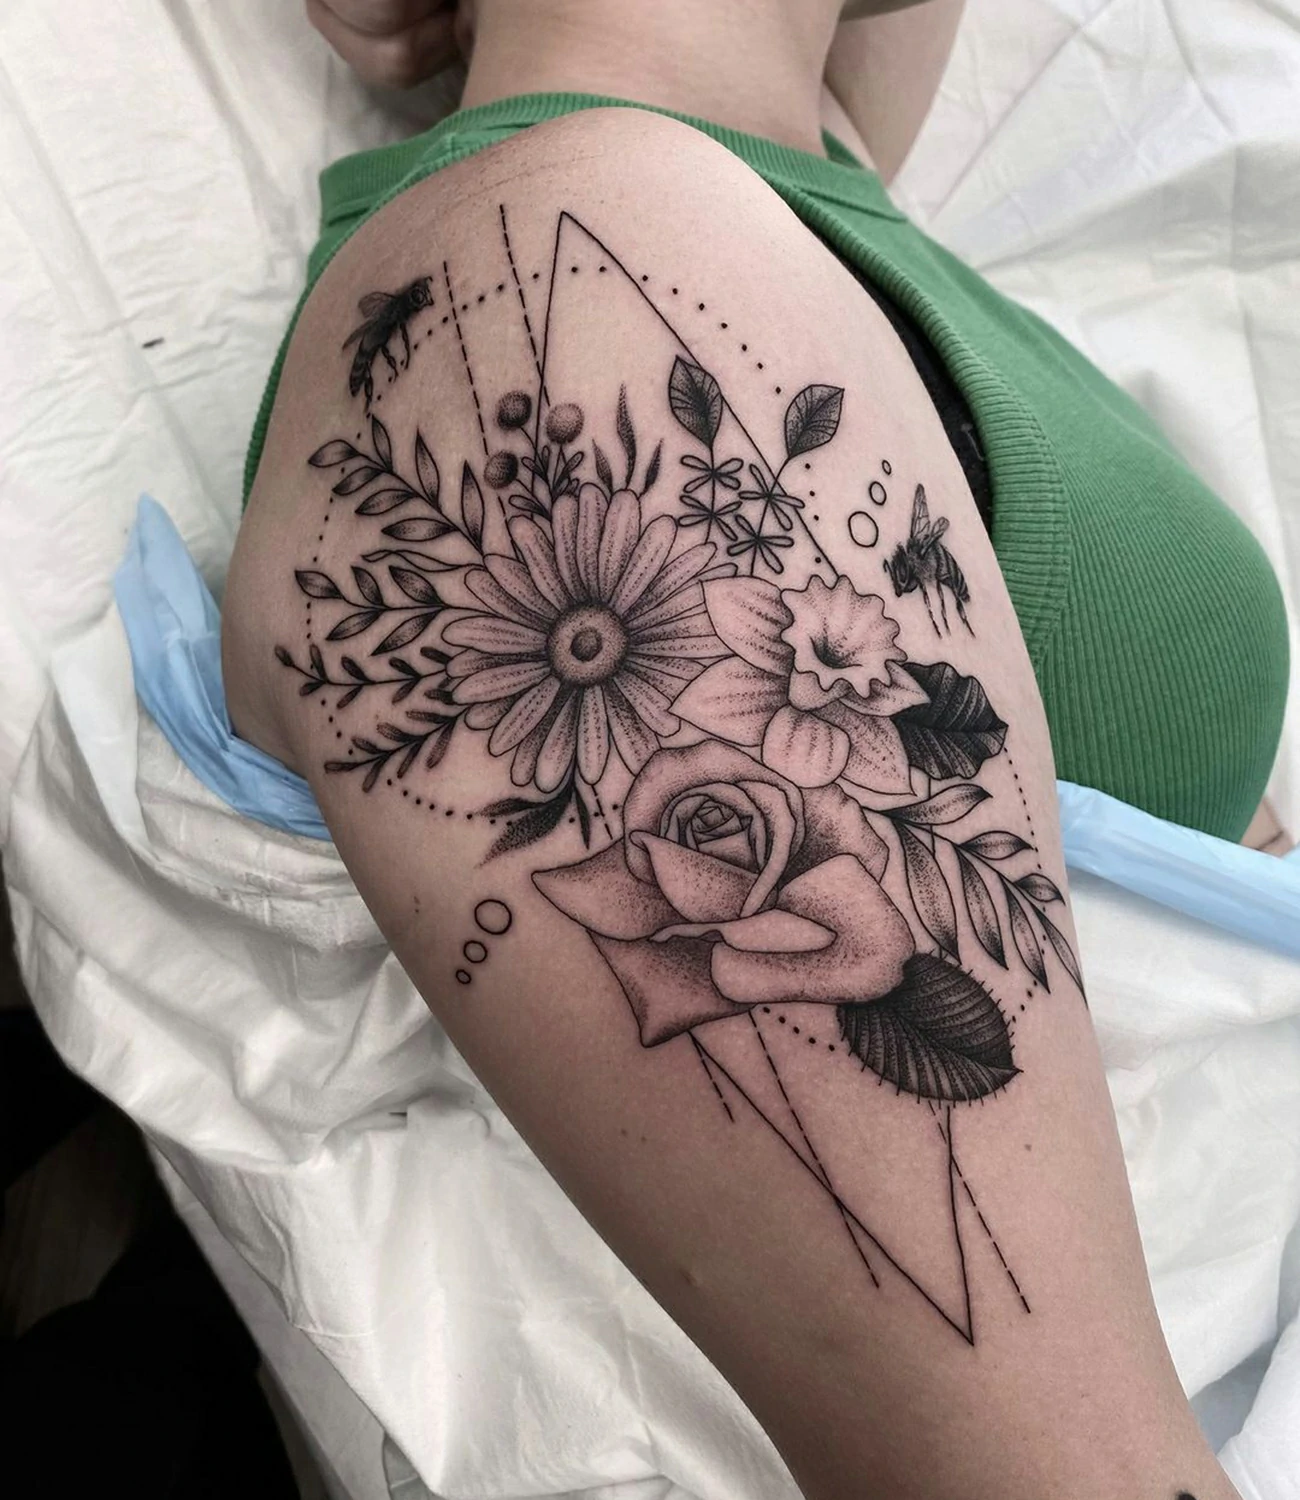 Geometric Flower Tattoo: Geometric flower tattoos blend natural beauty with geometric precision, symbolizing growth and the harmony of nature.